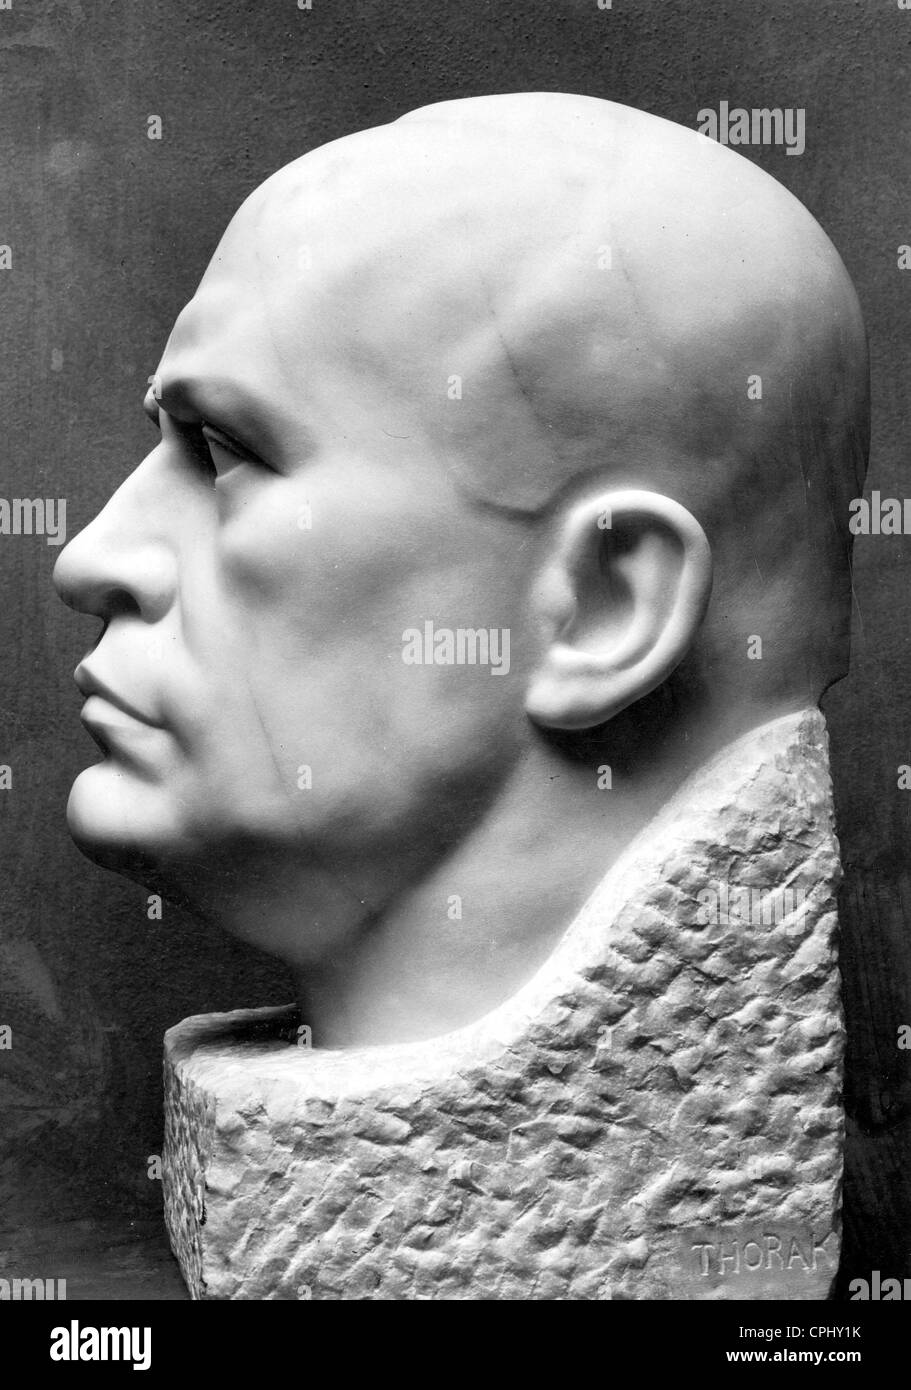 Marble bust of Benito Mussolini Stock Photo - Alamy